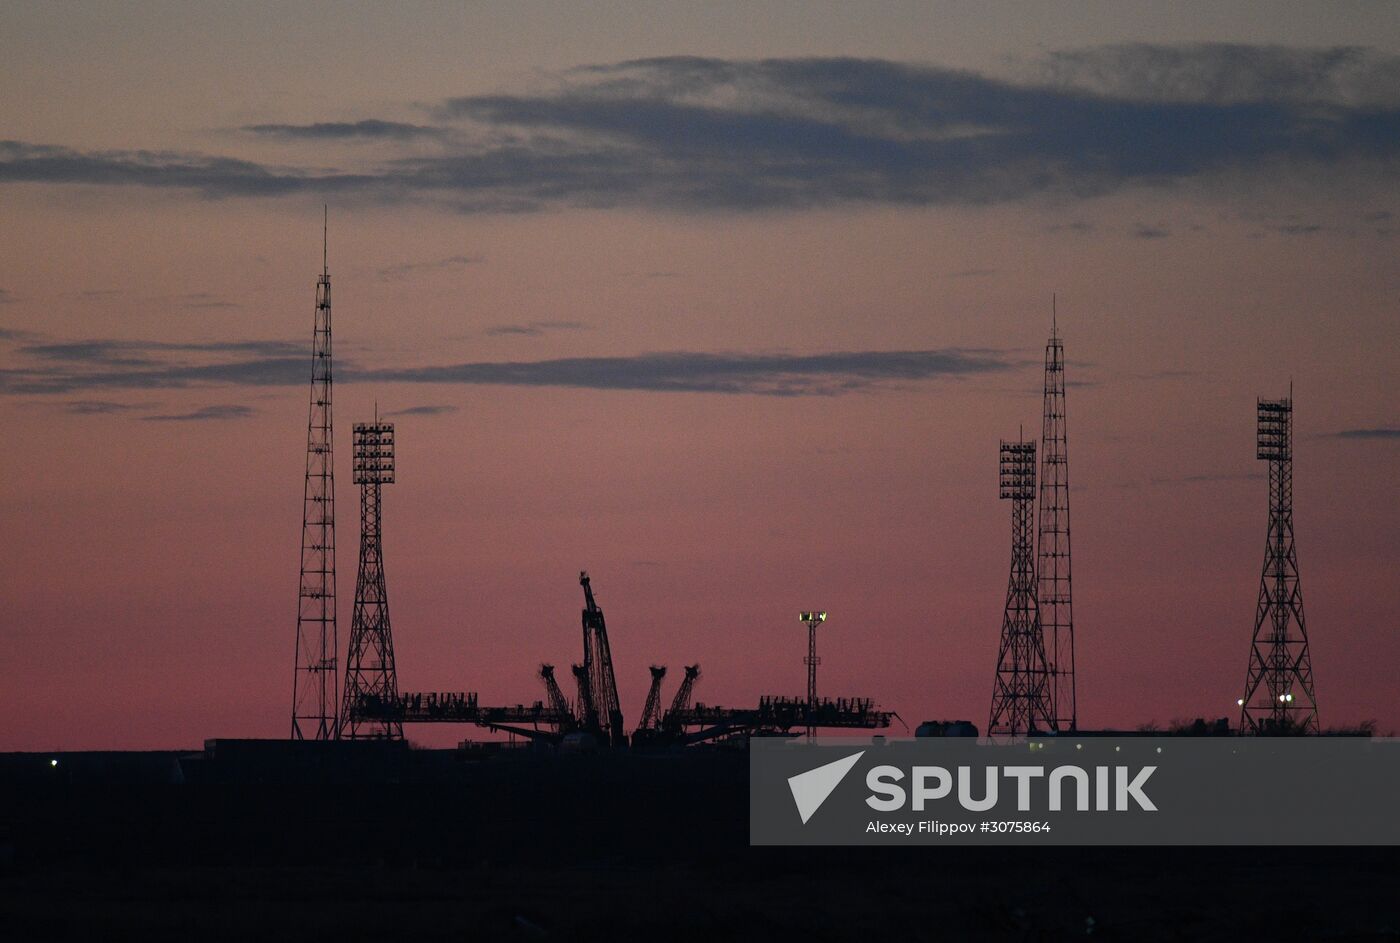 Soyuz FG carrier rocket with Soyuz MS-04 manned spacecraft moved to launch pad